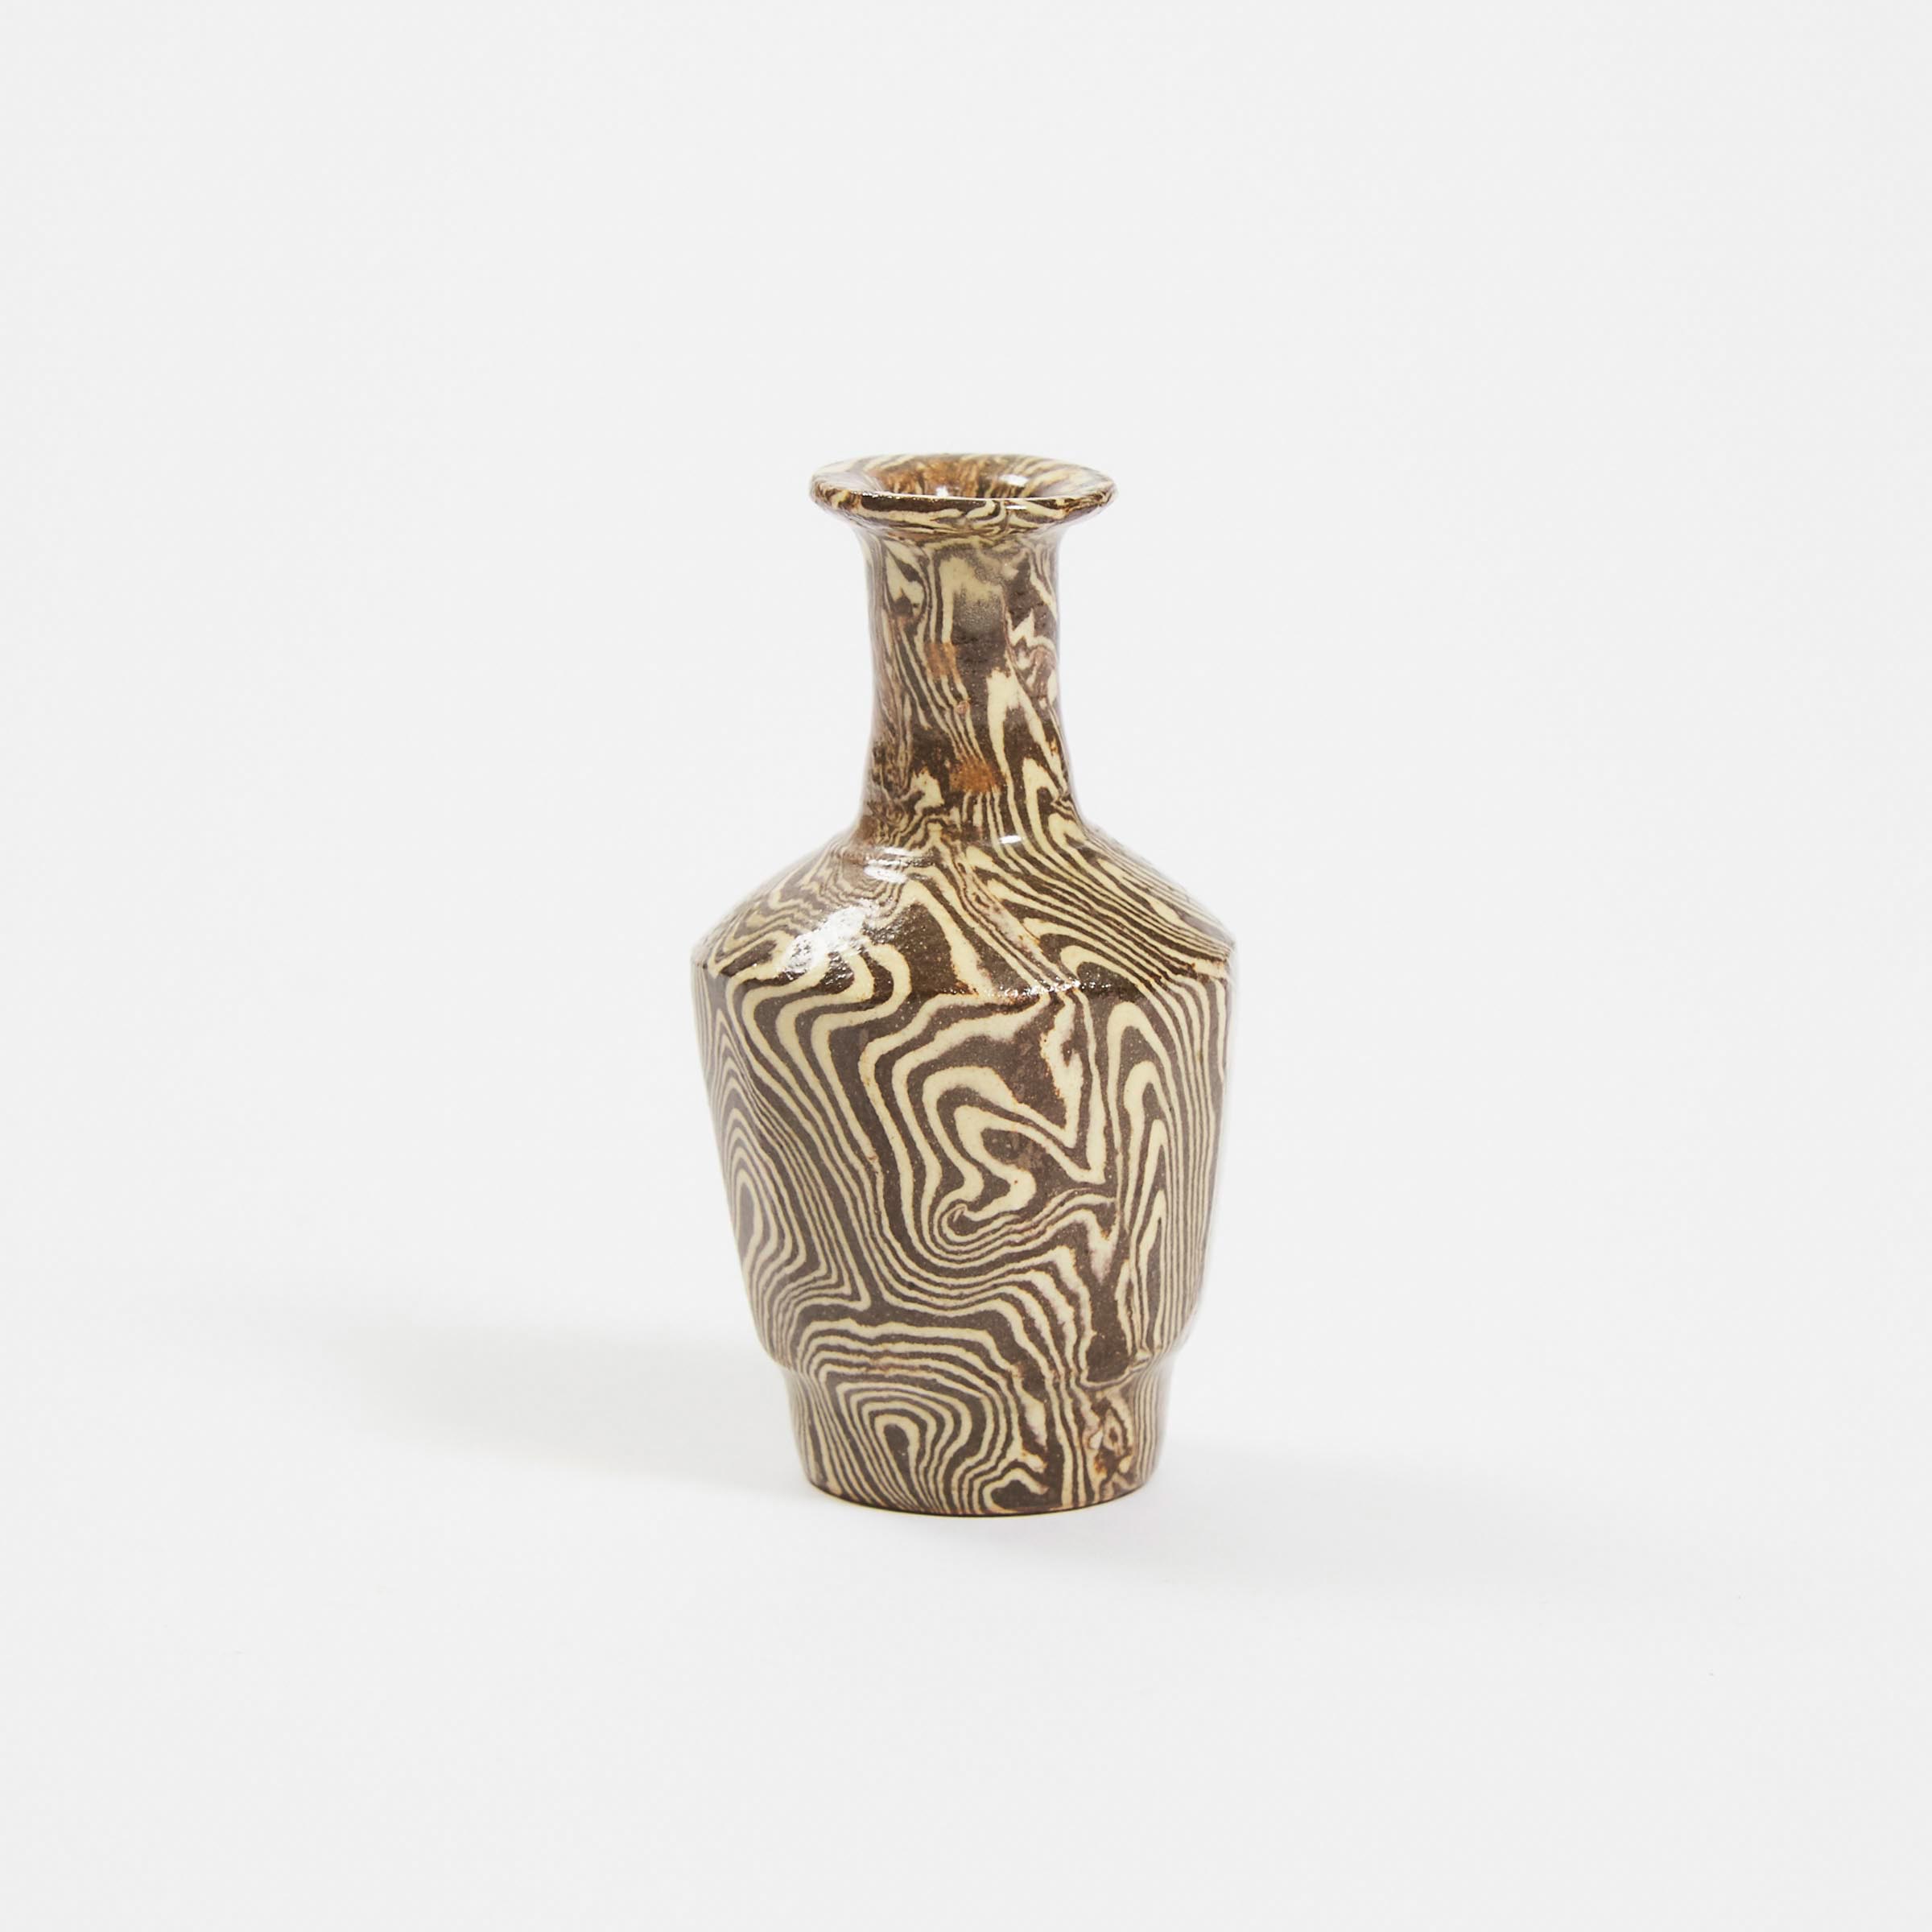 A Small Cizhou Marbled Vase, Song Dynasty or Later